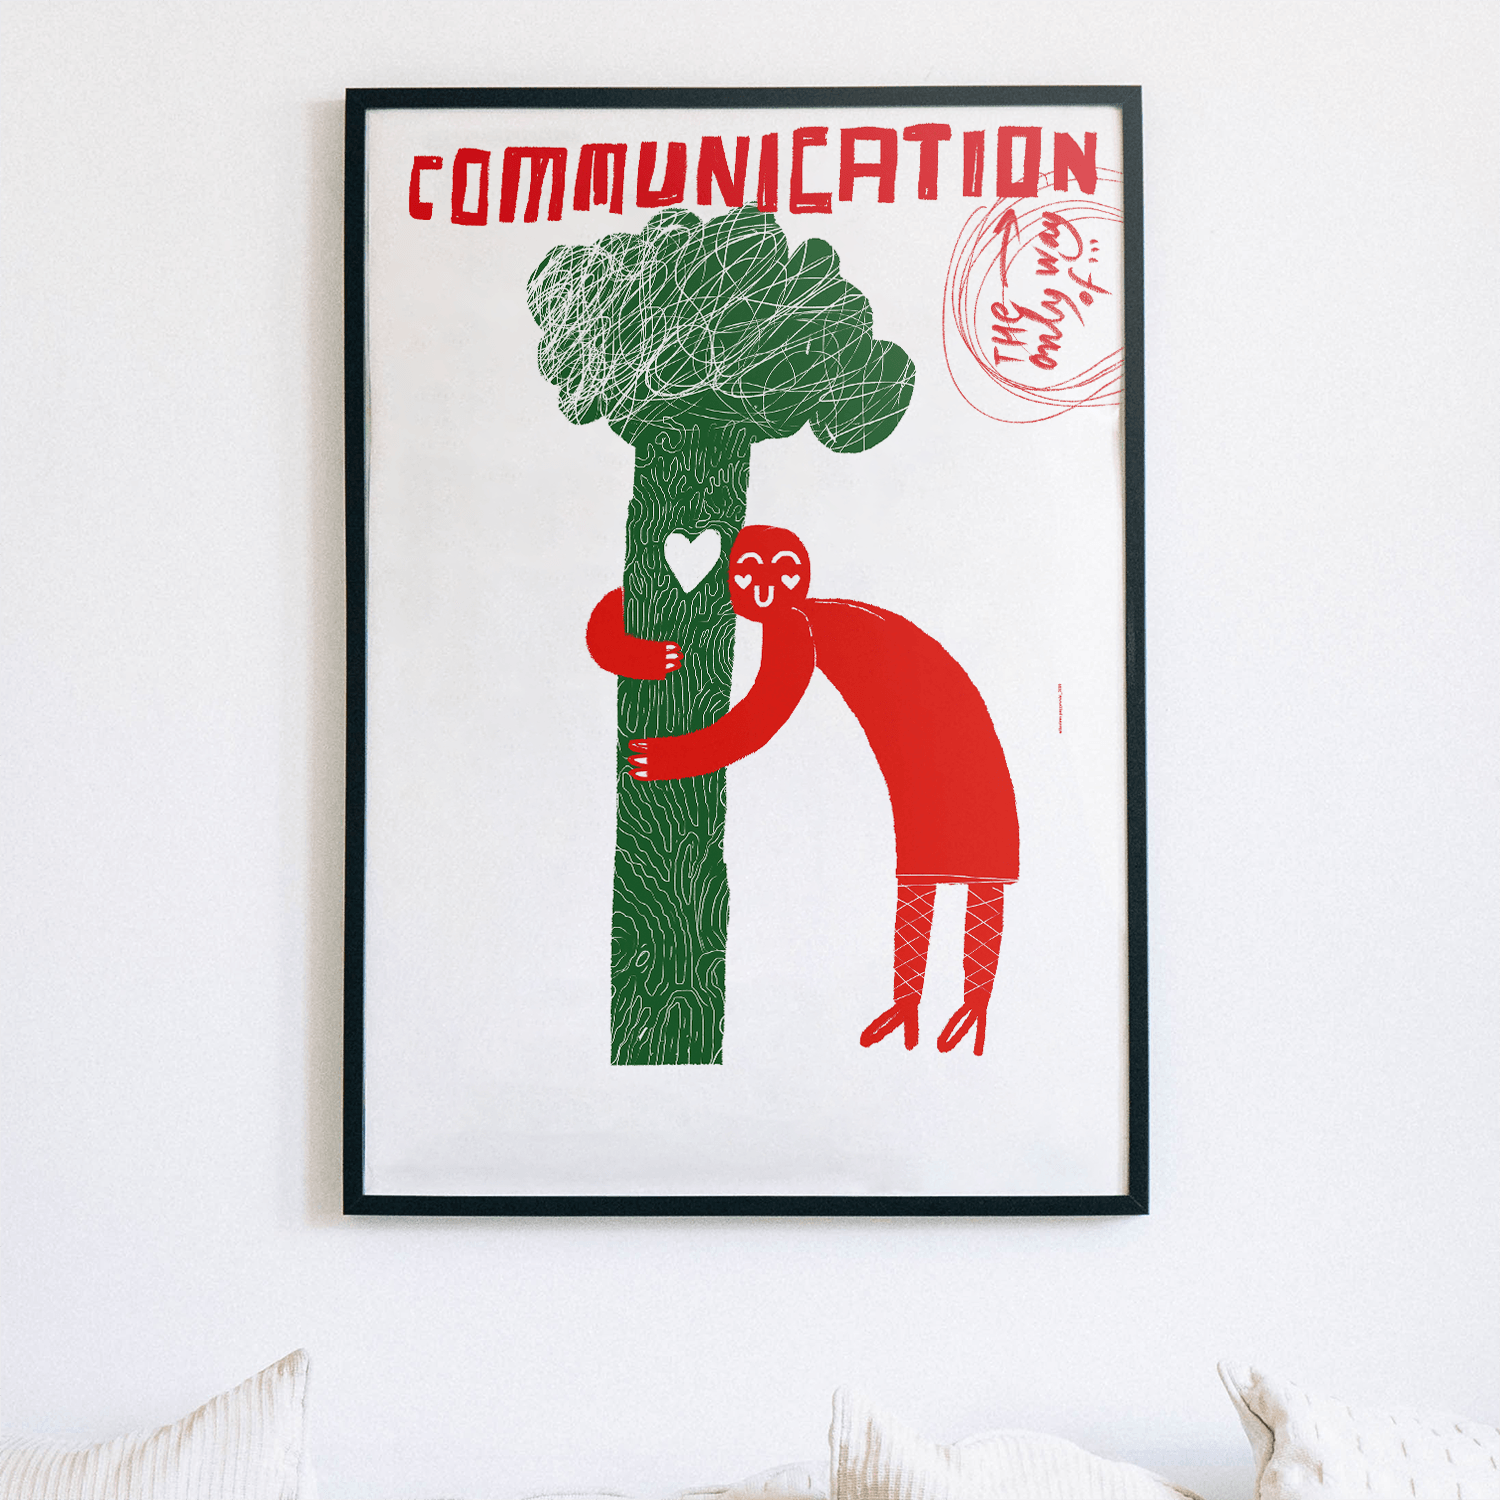 Plakat: "The only way of communication"